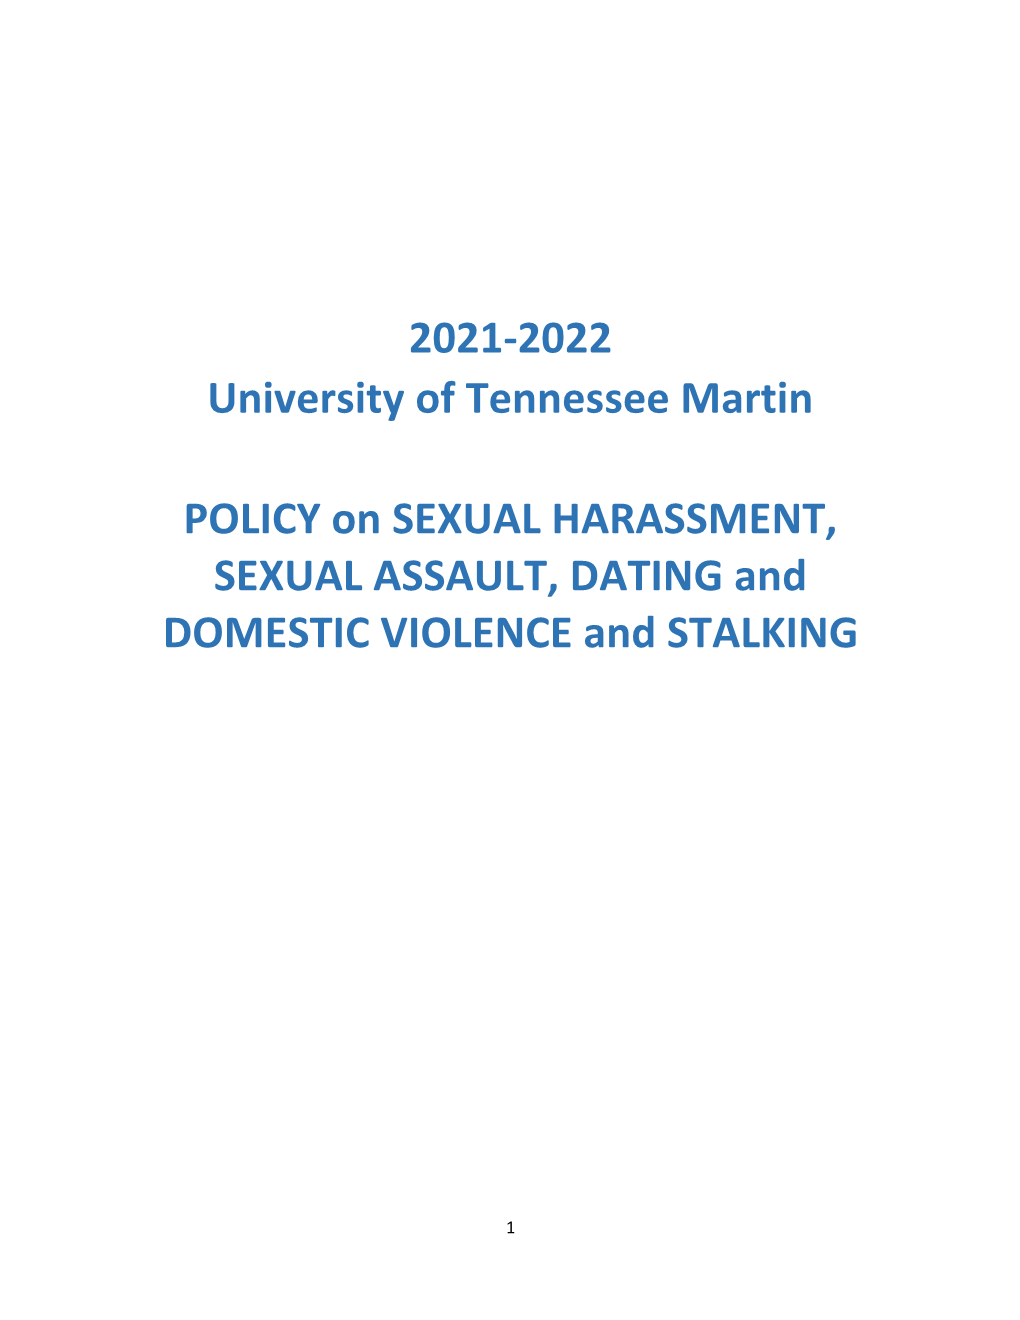 Policy on Sexual Harassment,Sexual Assault